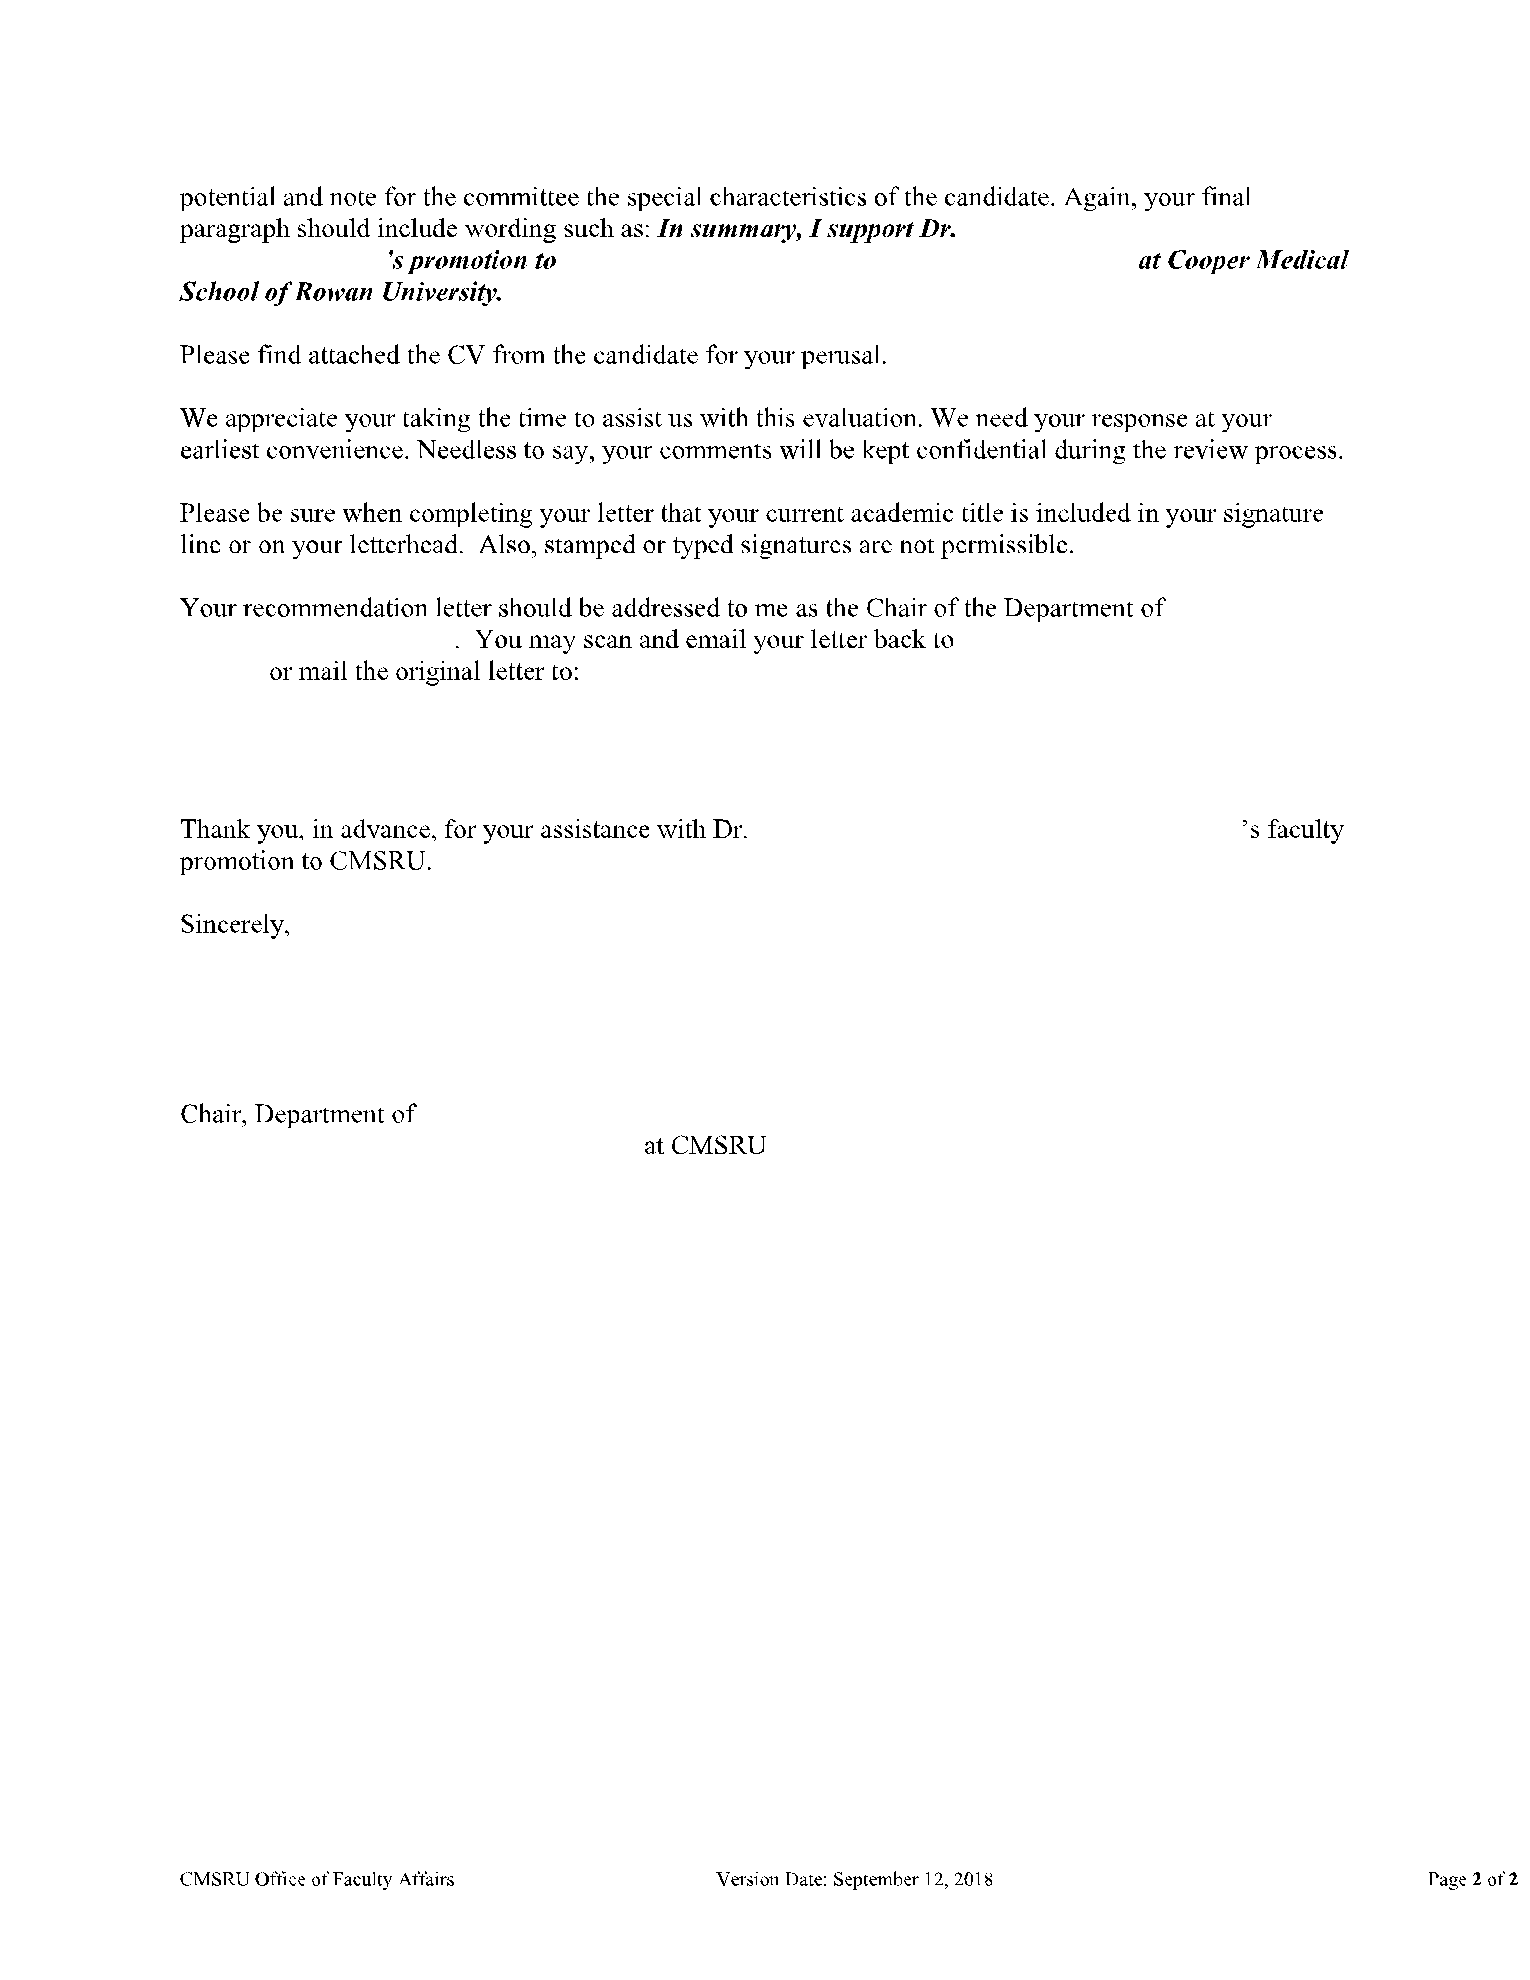 Medical School Letter of Recommendation 2